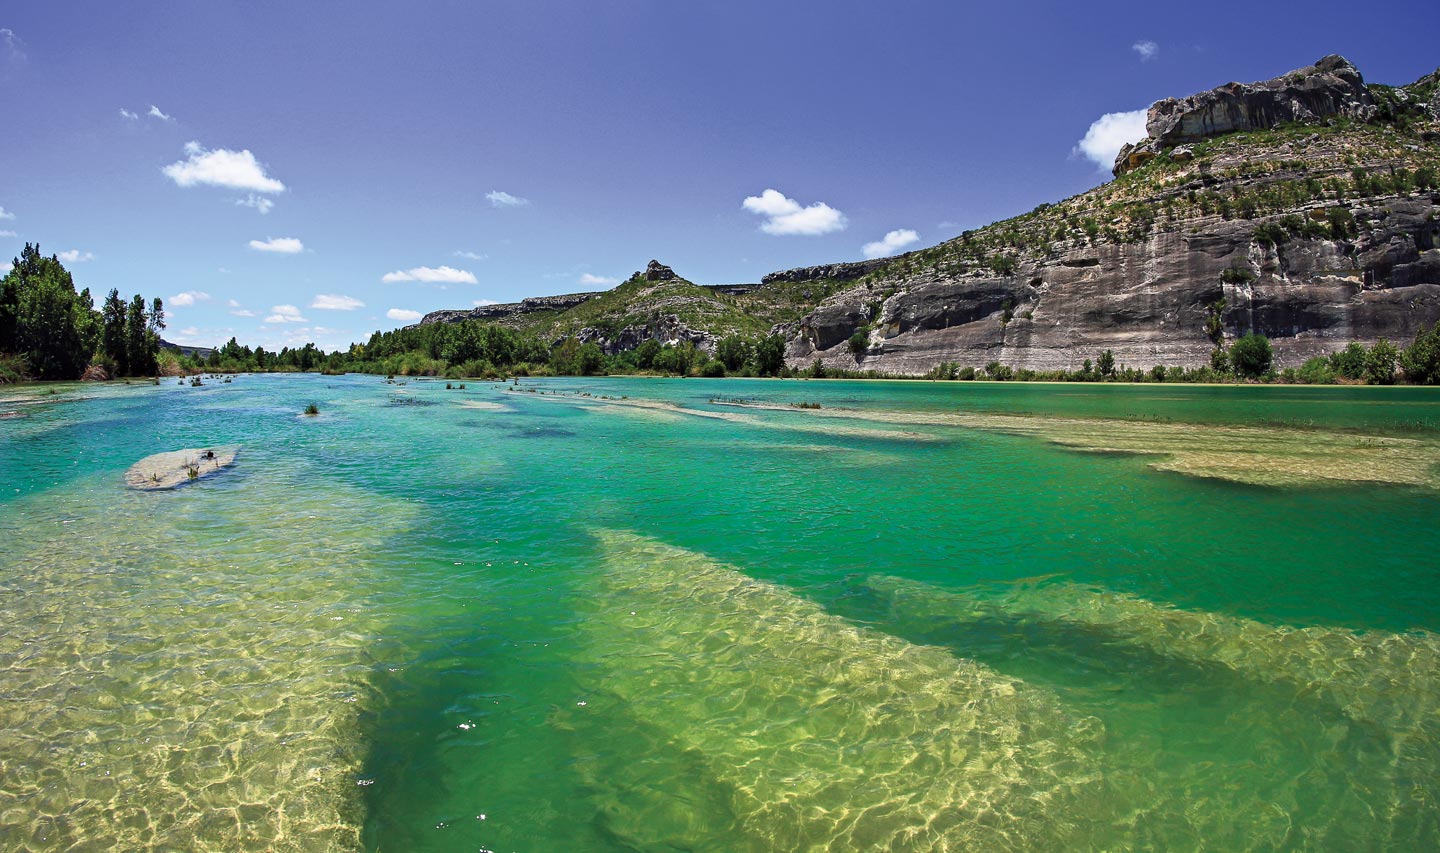 The clear water of the Devils River. Photo: Jack Johnson